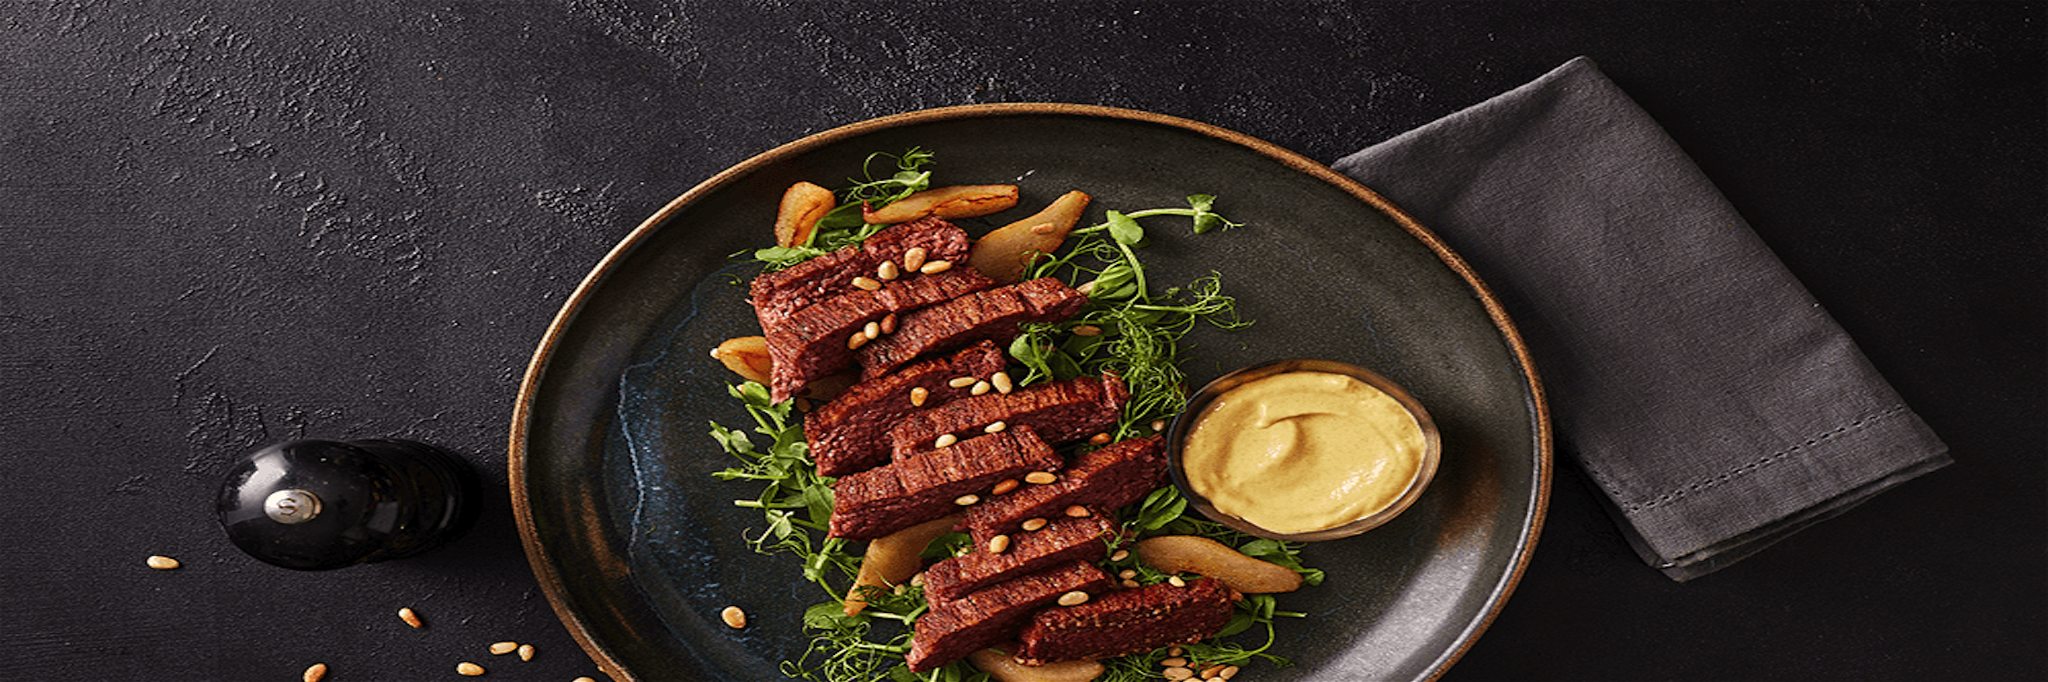 Redefine Meat&nbsp;is launching its hanger steak along with other meat cuts in Europe.